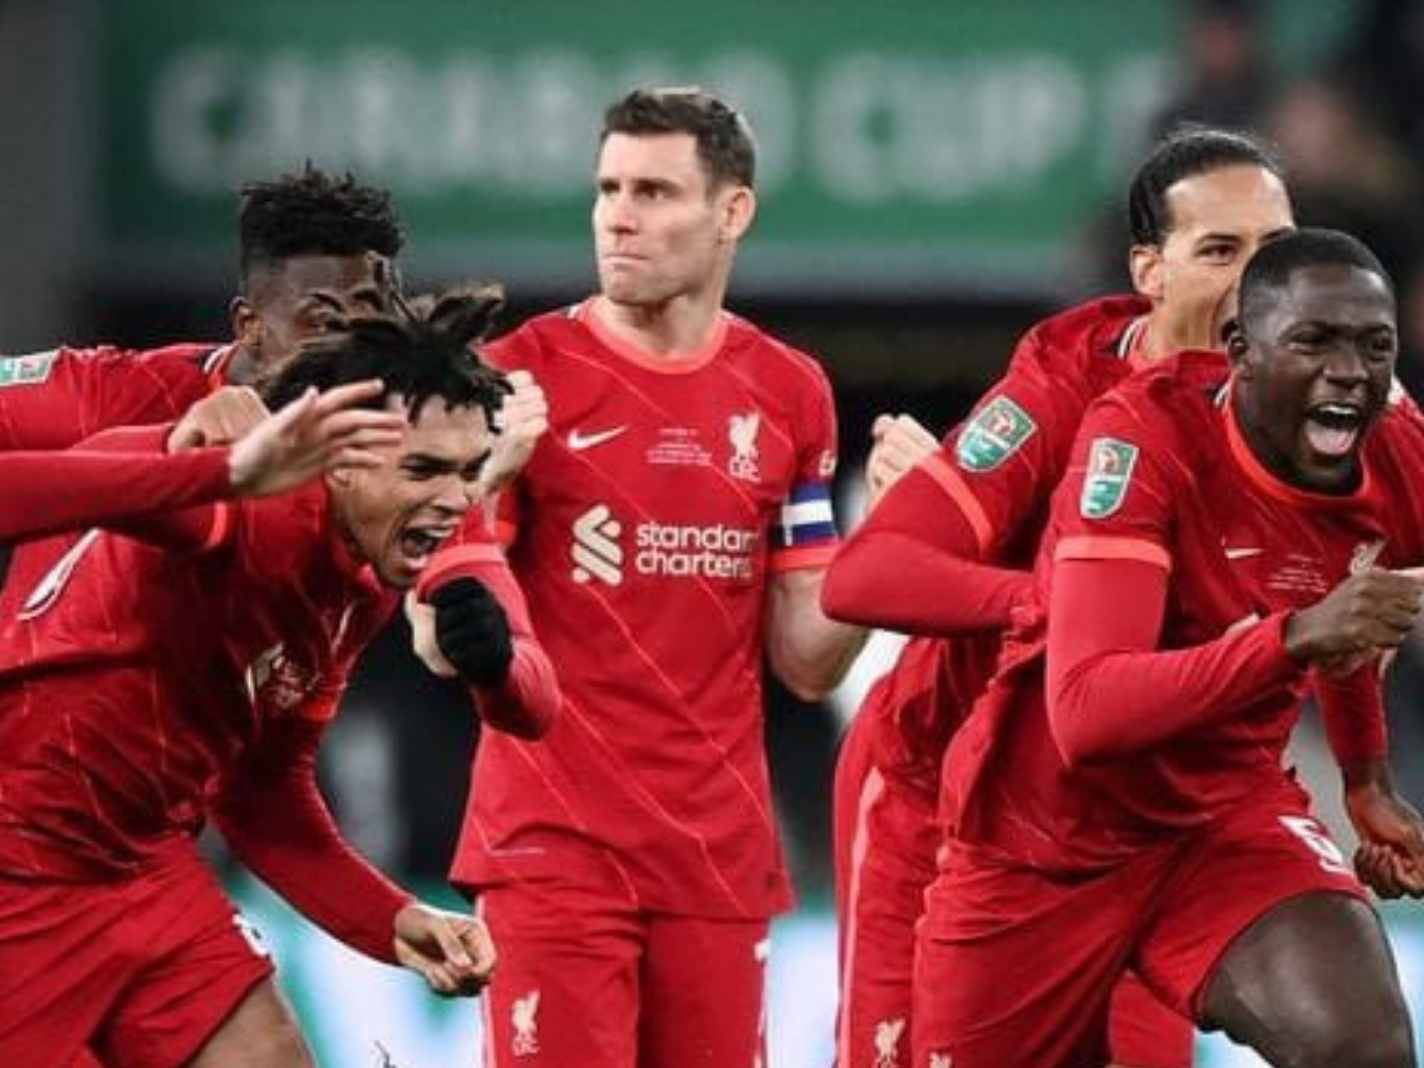 James Milner’s nonreaction to Carabao Cup moment has fans in splits